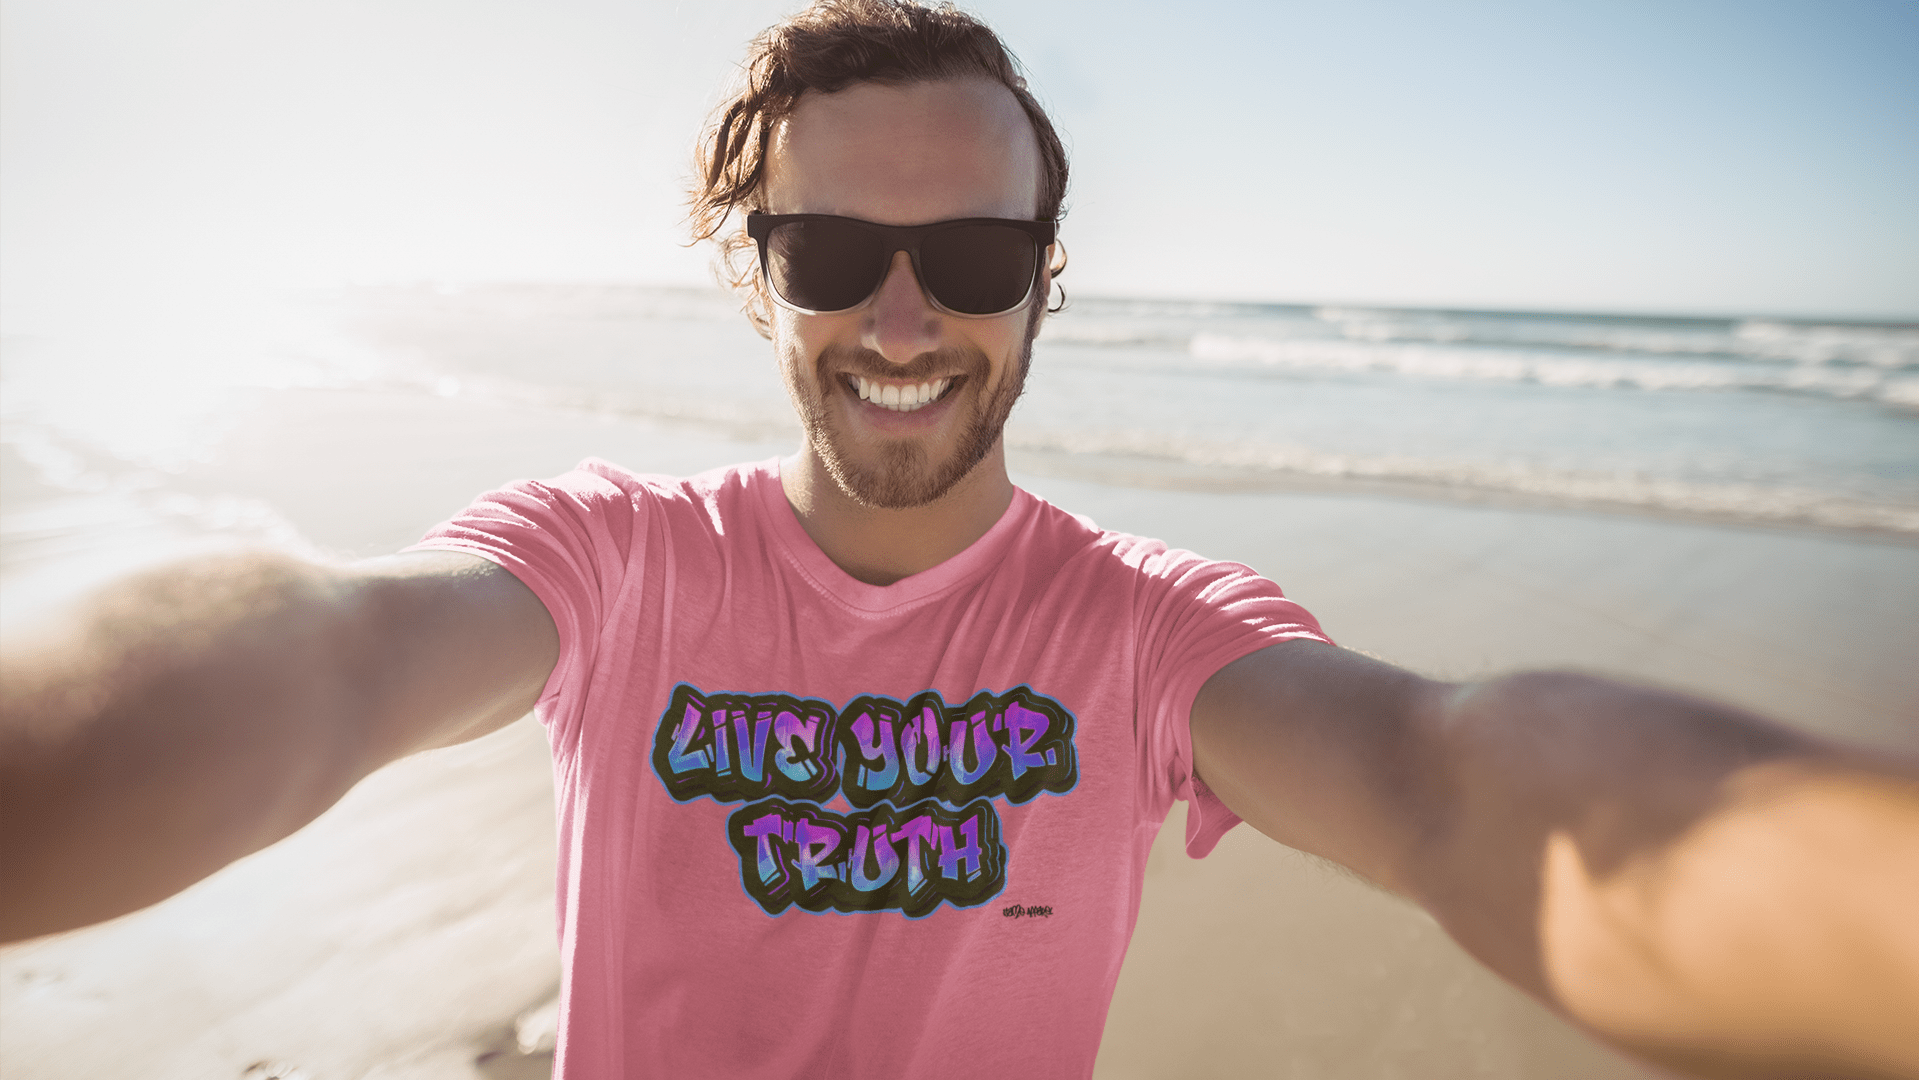 Man standing on a beach with the ocean behind him. He is looking into the camera taking a selfie with both arms extended out taking the picture. He has on sunglasses and is smiling with the sun behind him coming from the left. He is wearing a pink gay pride t-shirt from Same Apparel LGBTQ clothing brands Live your truth gay pride t-shirt collection. The graphic is graffiti style text with "Live your truth" written on the front center of the pride shirt.